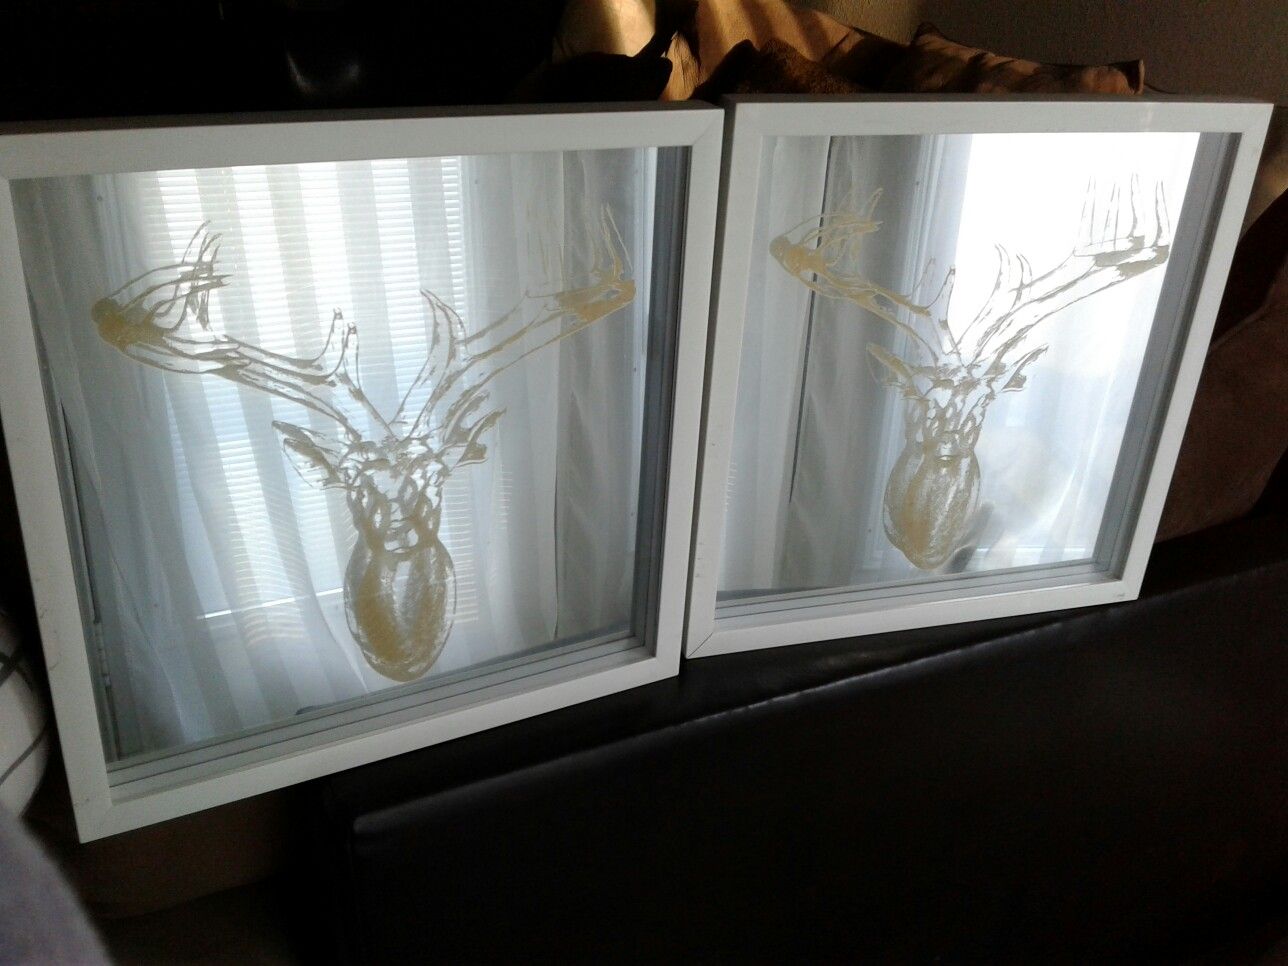 Wall decor with mirror and deer picture